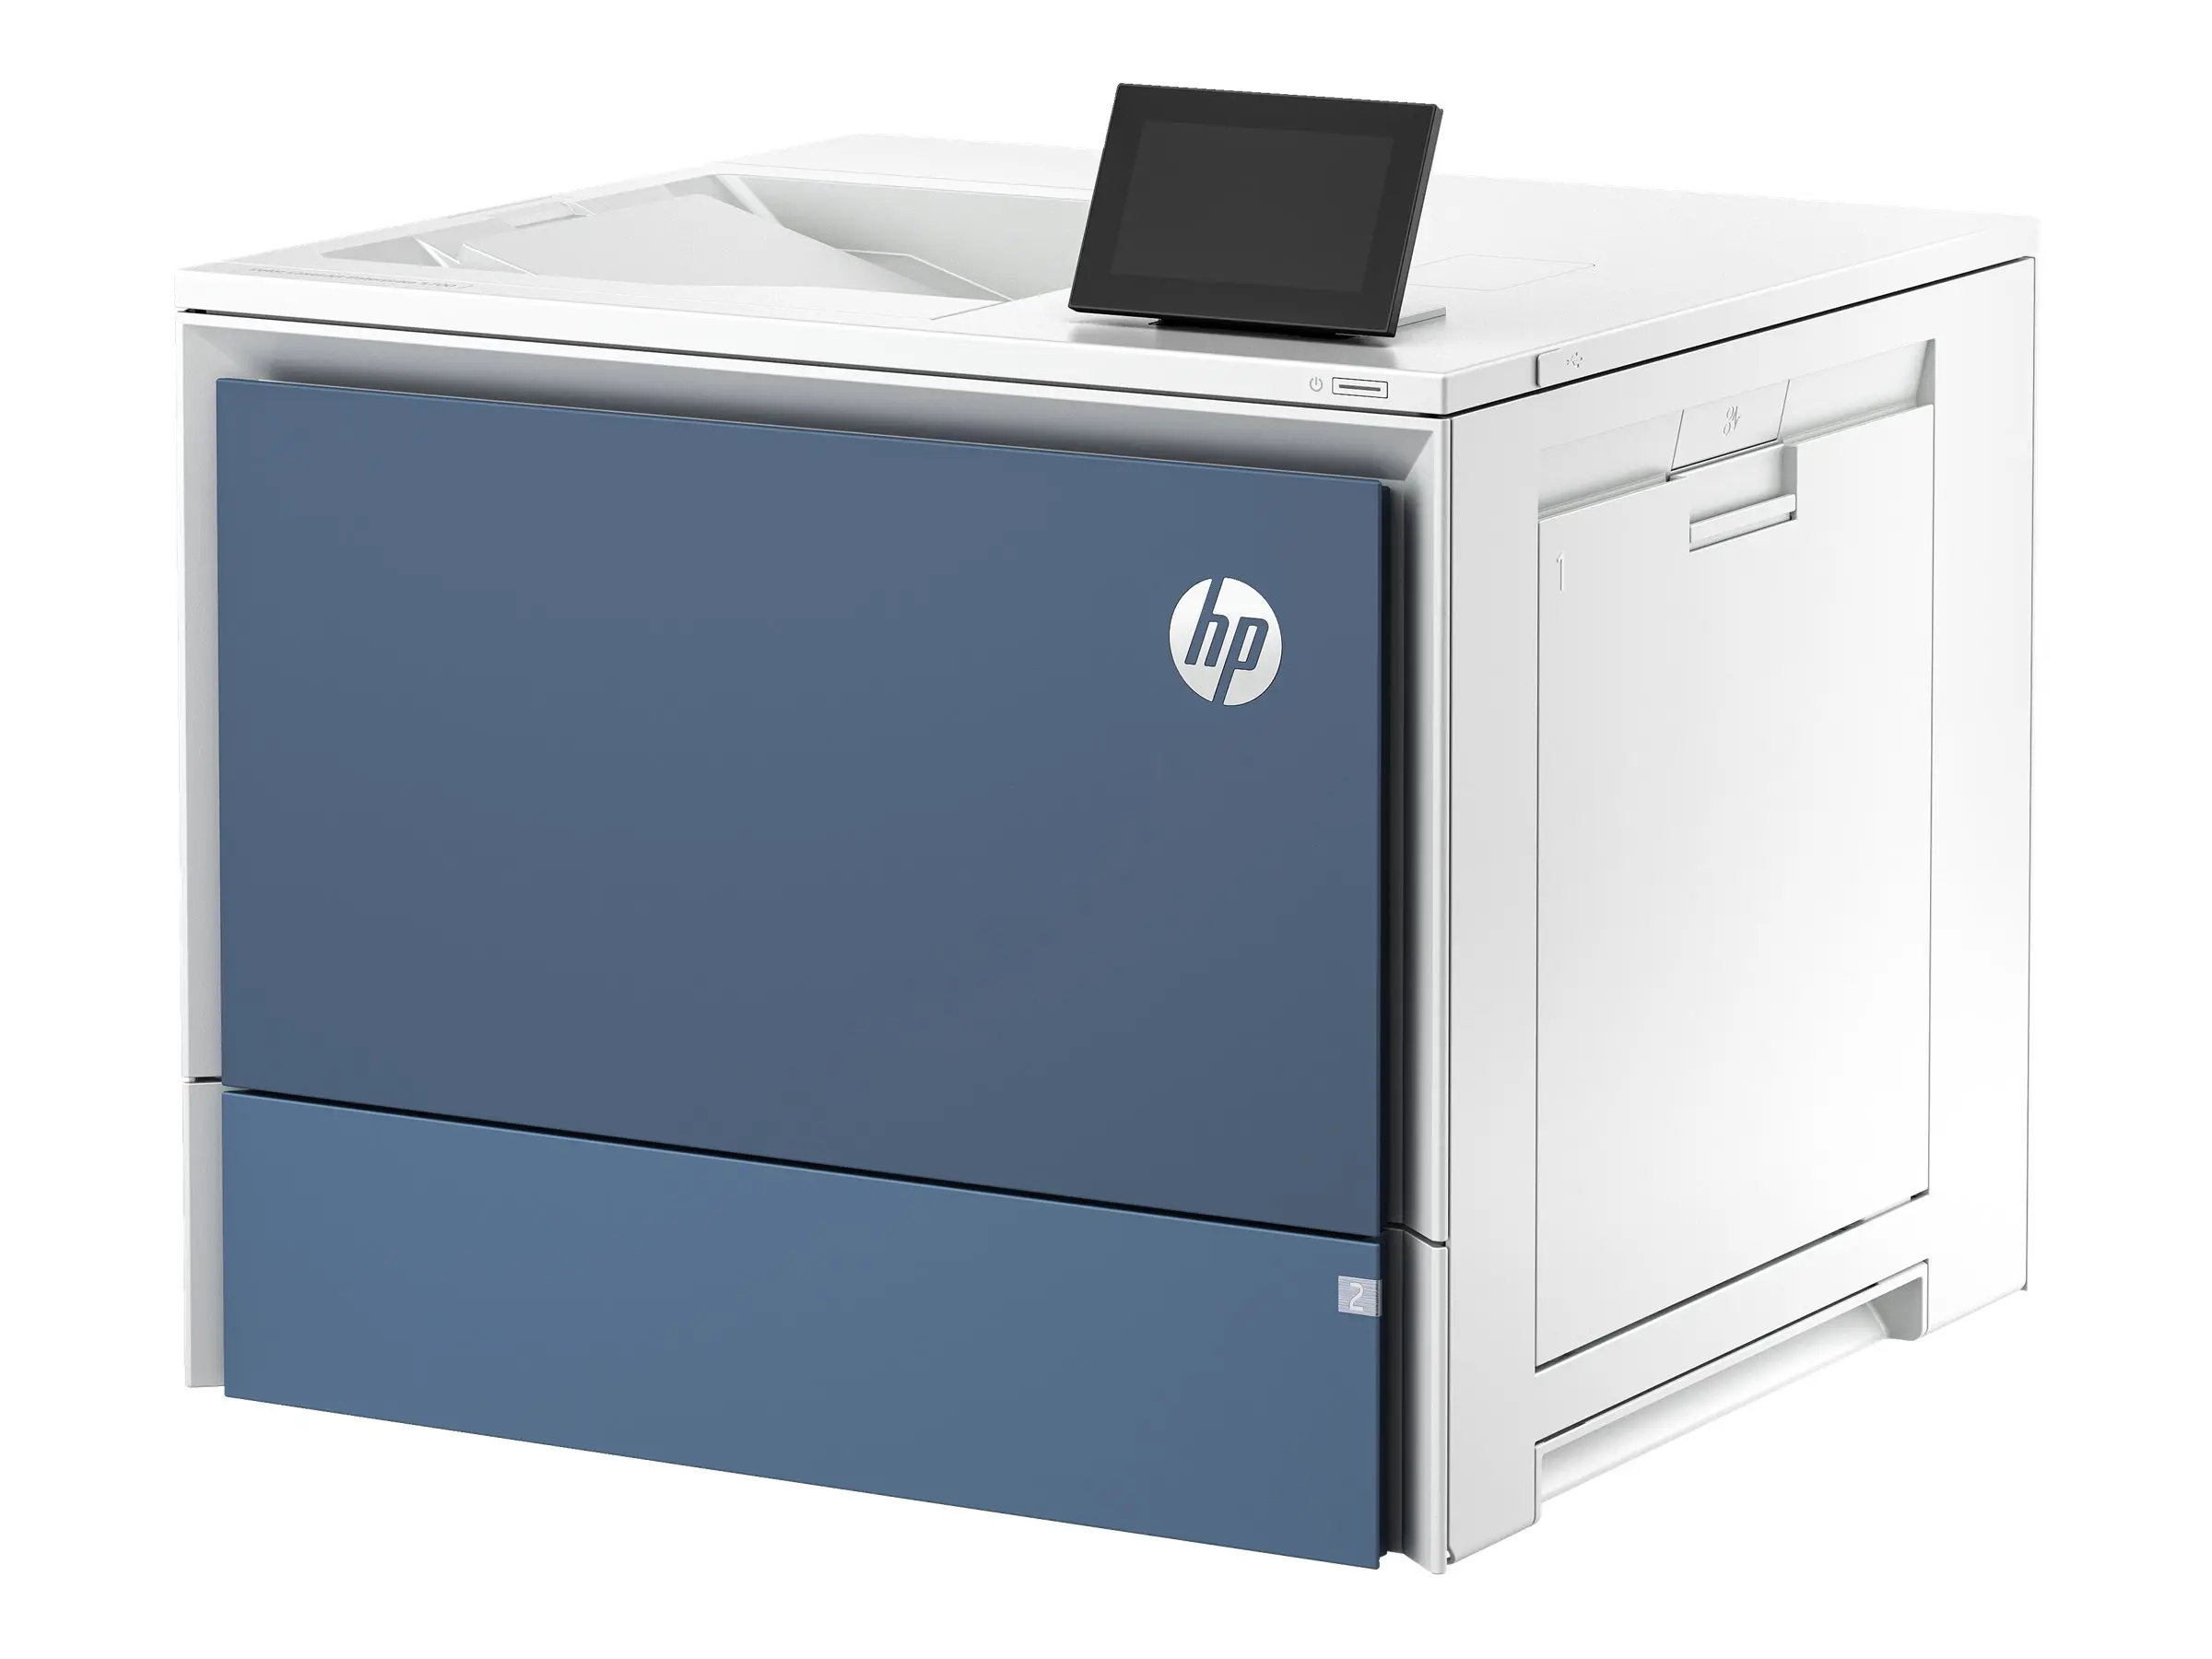 usb composite hewlett-packard hp laserjet - What format of USB does HP printer support